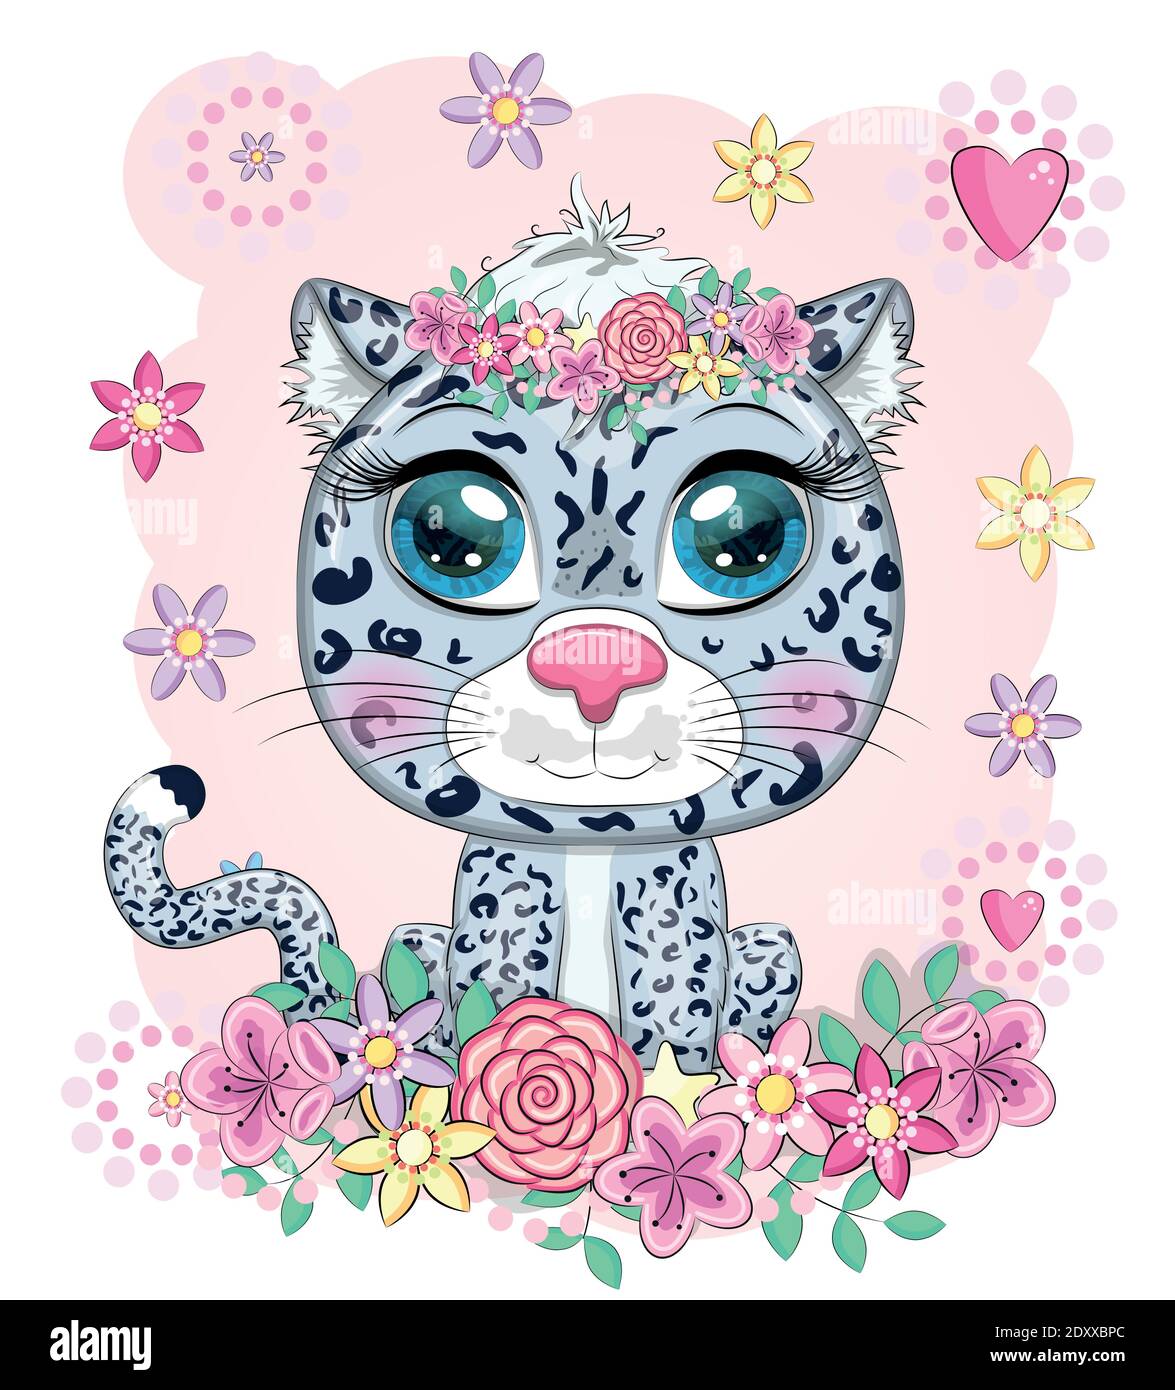 Cartoon snow leopard with expressive eyes. Wild animals, character, childish cute style. Stock Vector